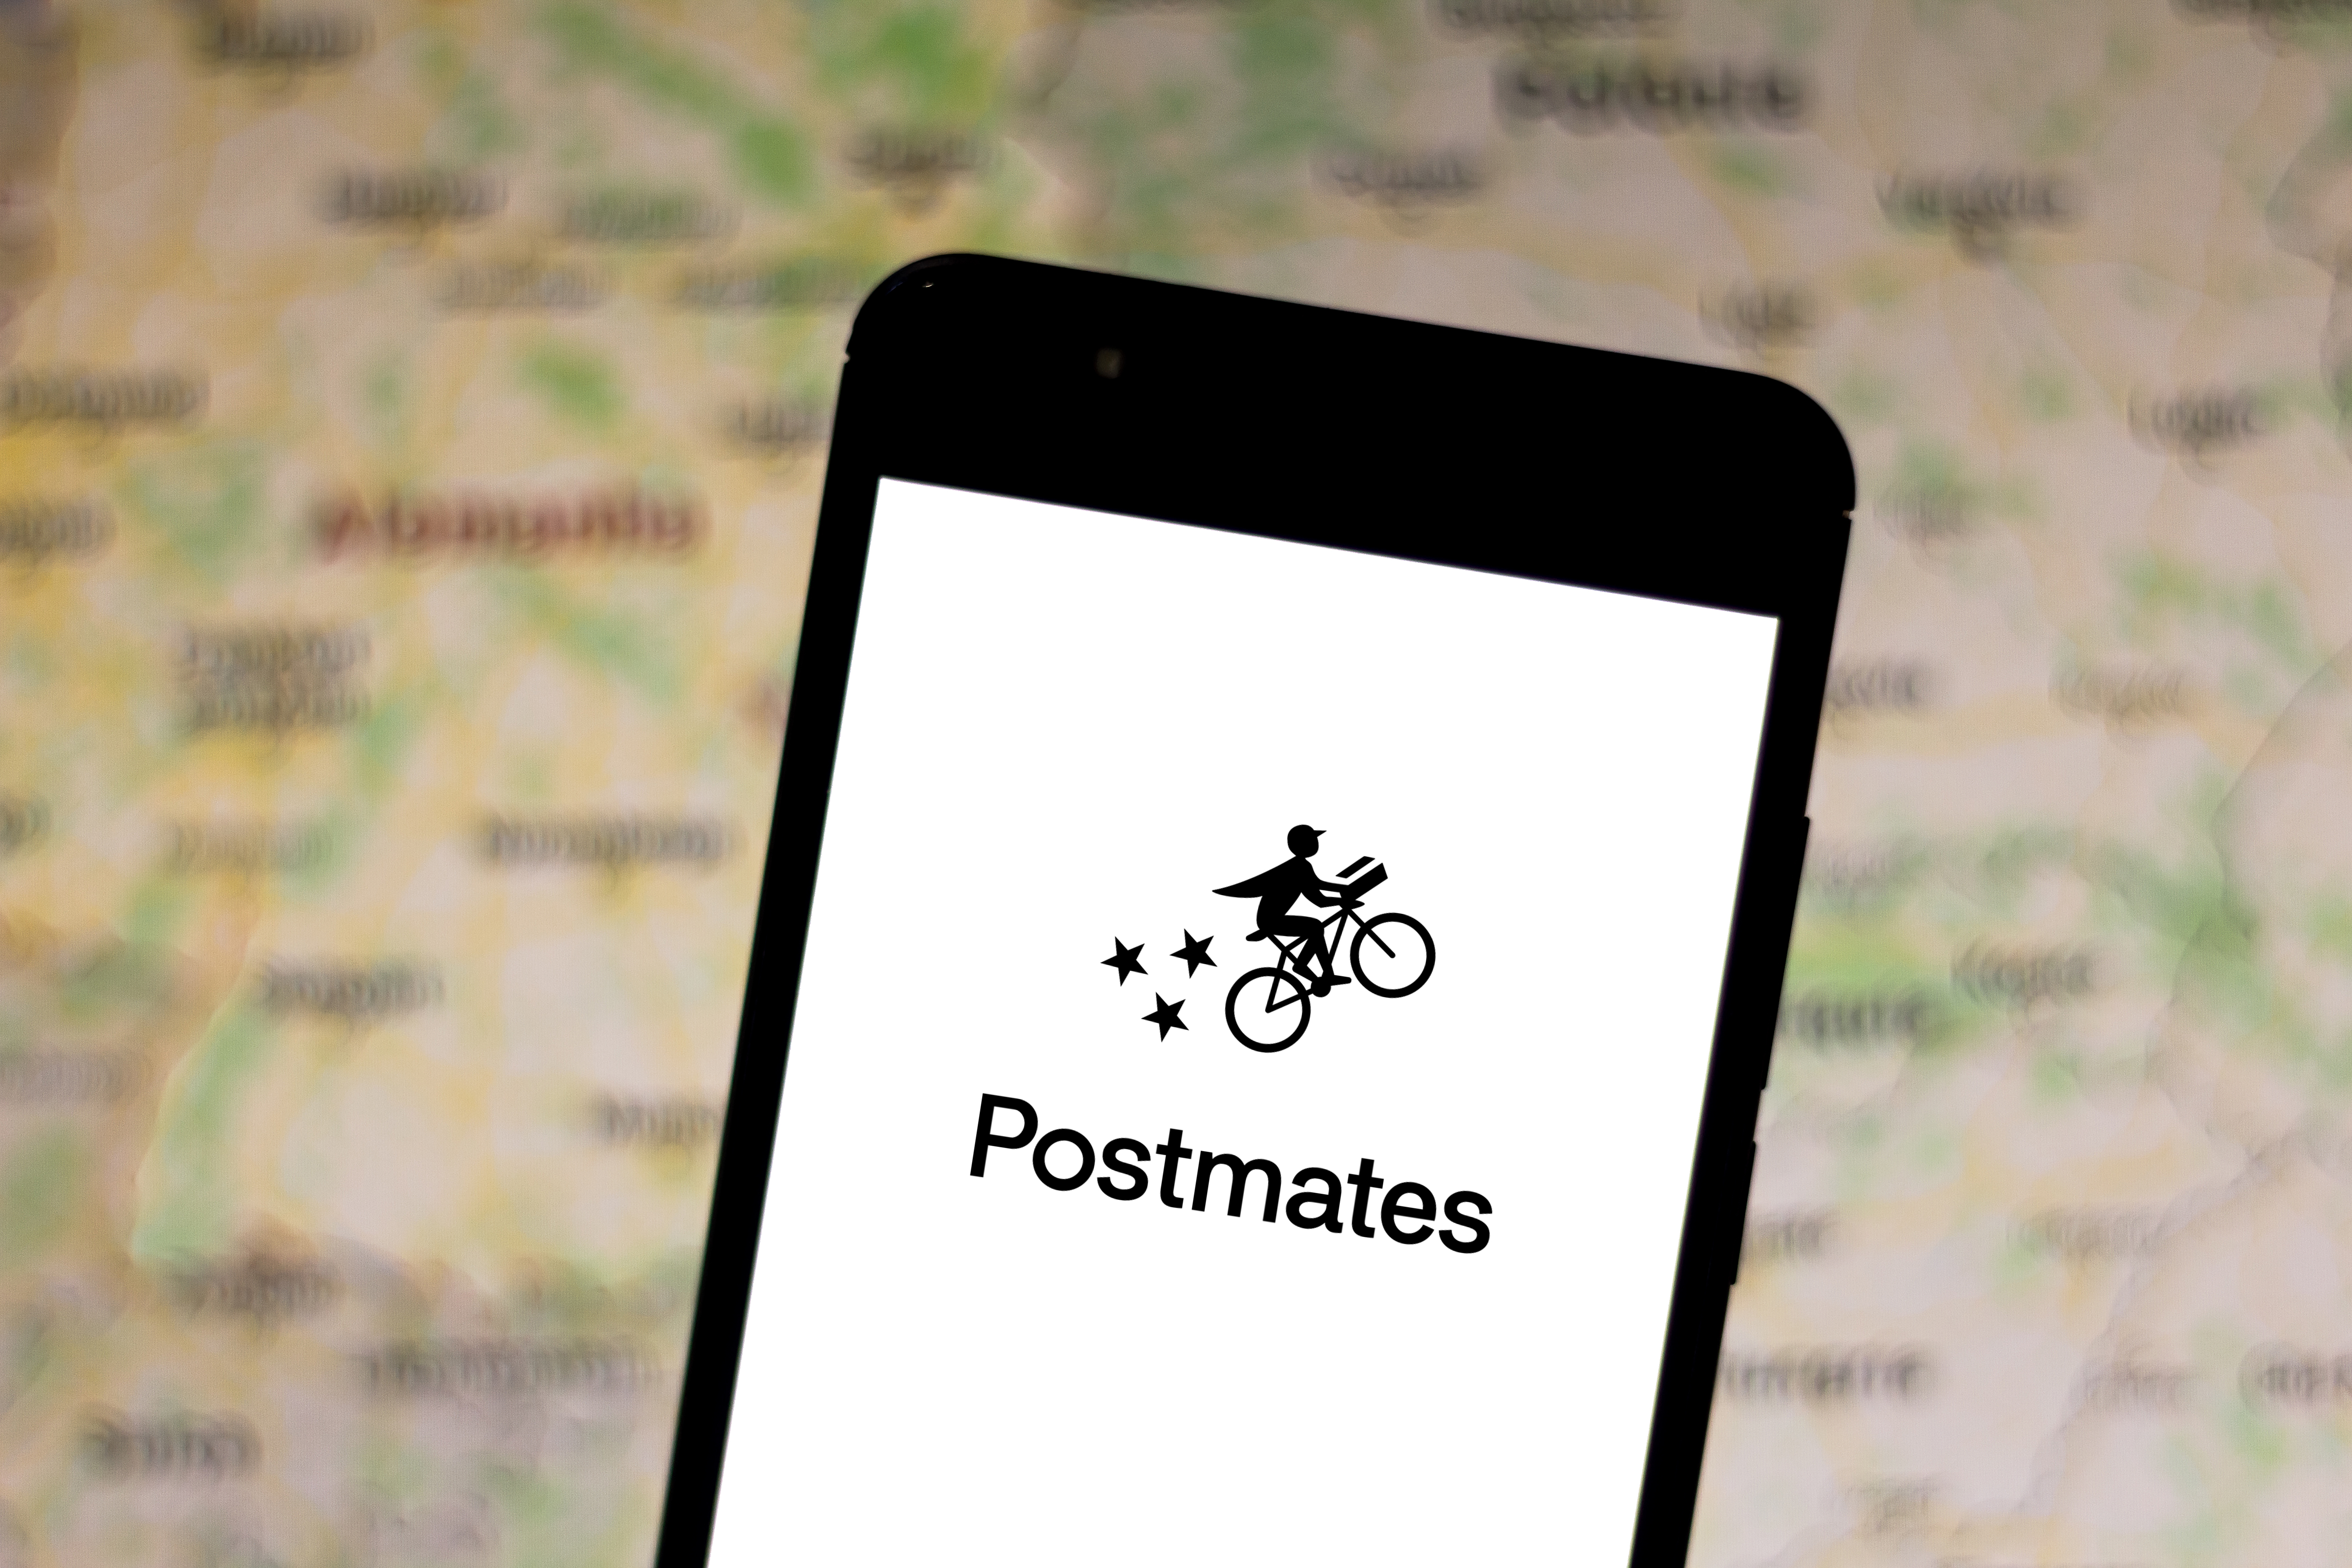 A cell phone displaying the Postmates logo